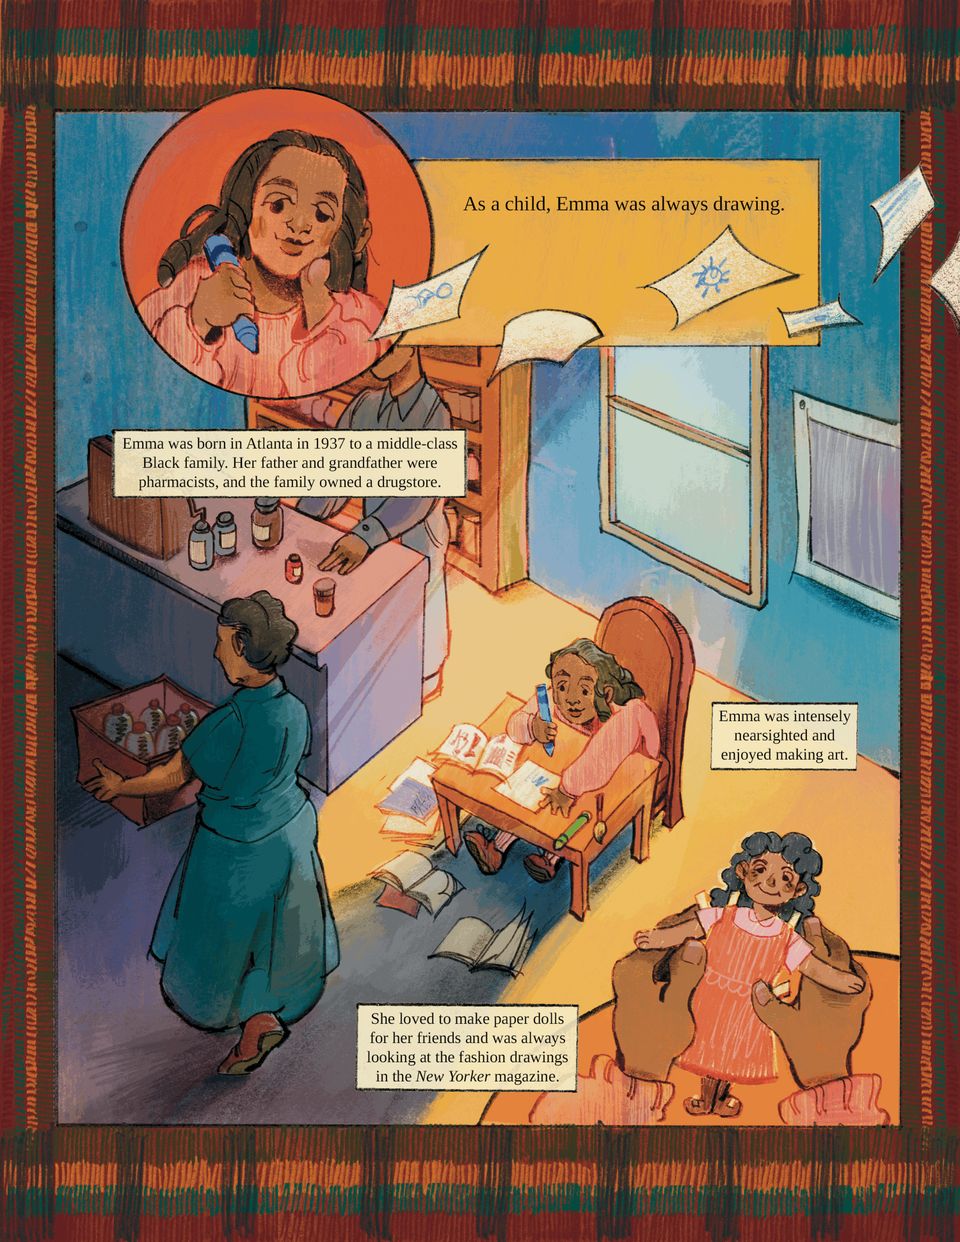 An illustration with text of Emma as a child drawing and making paper dolls in her parent's drug store.